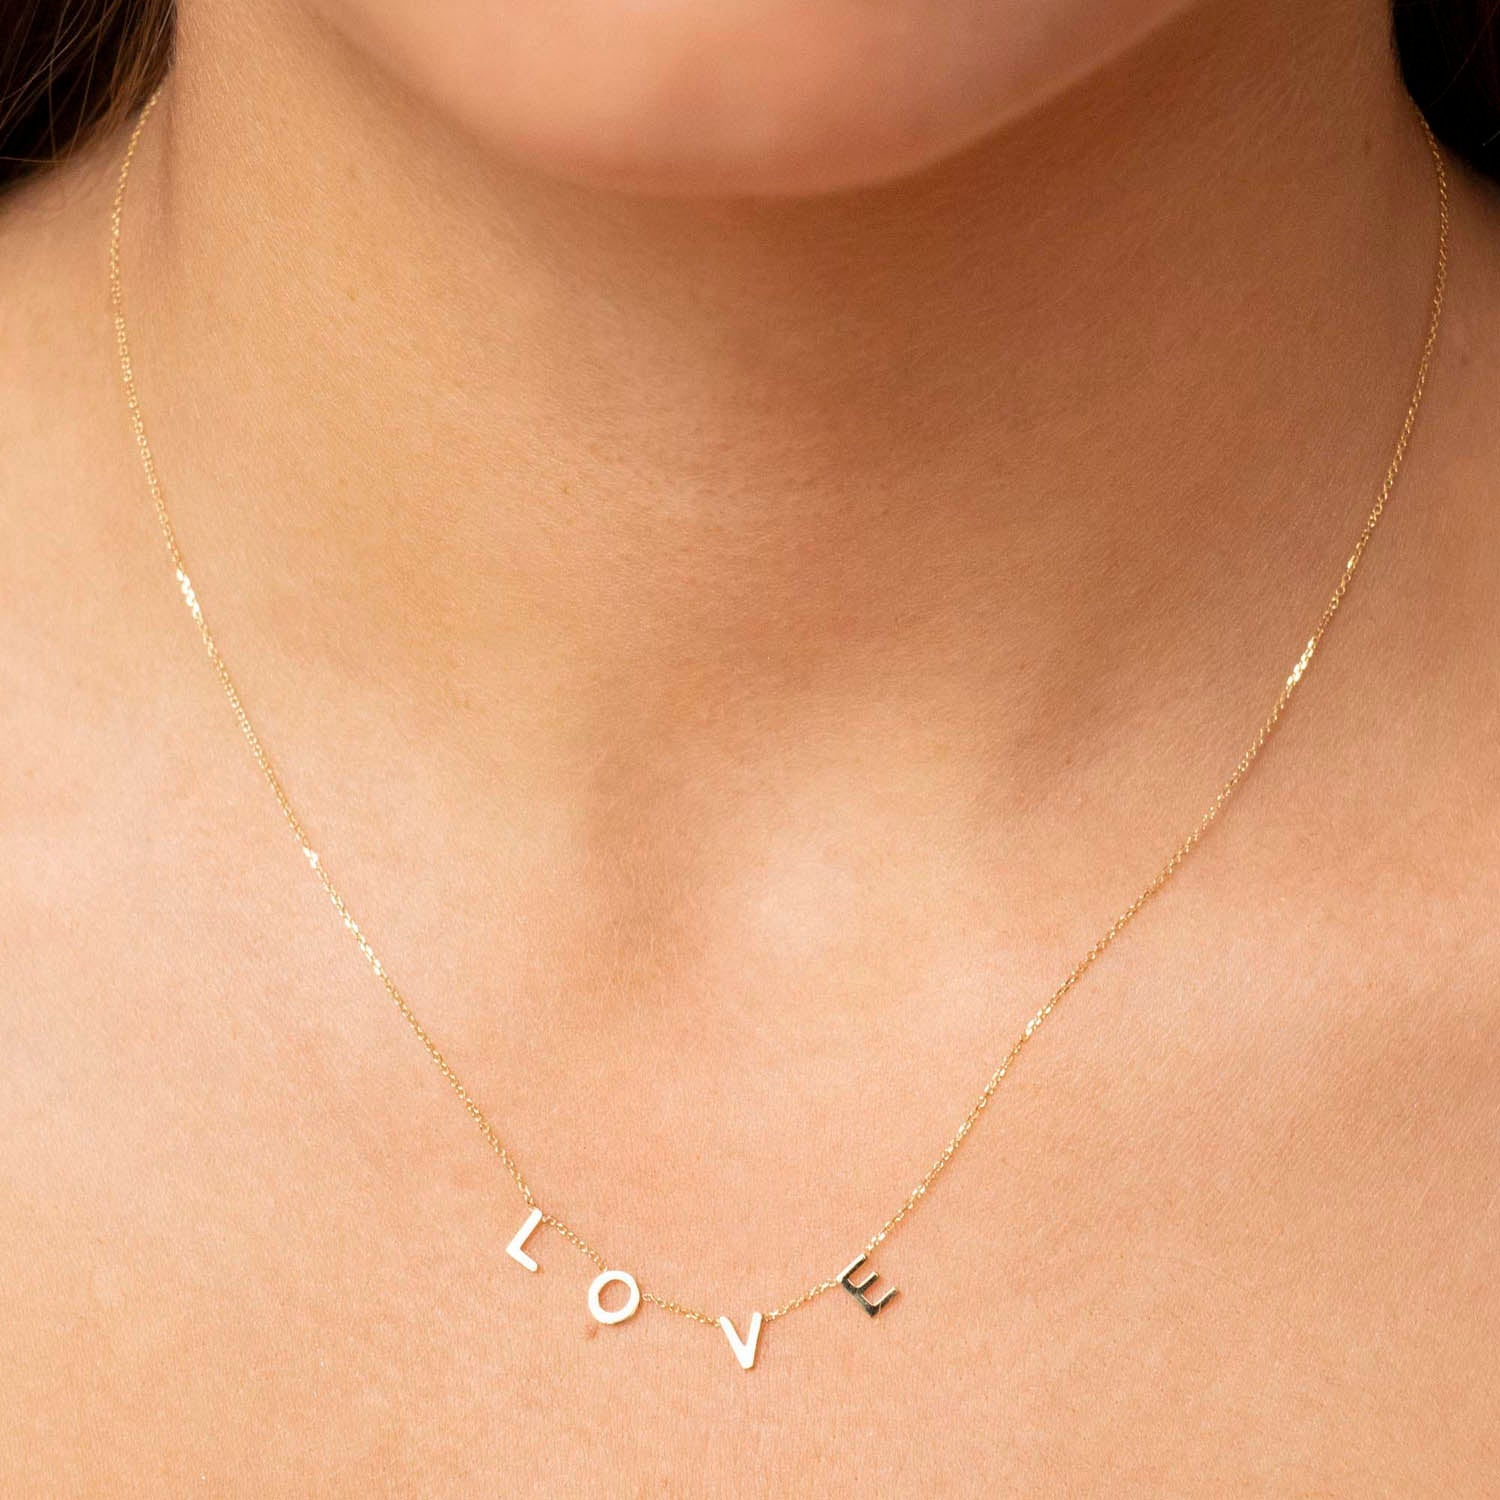 9ct Yellow Gold 5mm 'Love' Adjustable Necklace 38cm-43cm